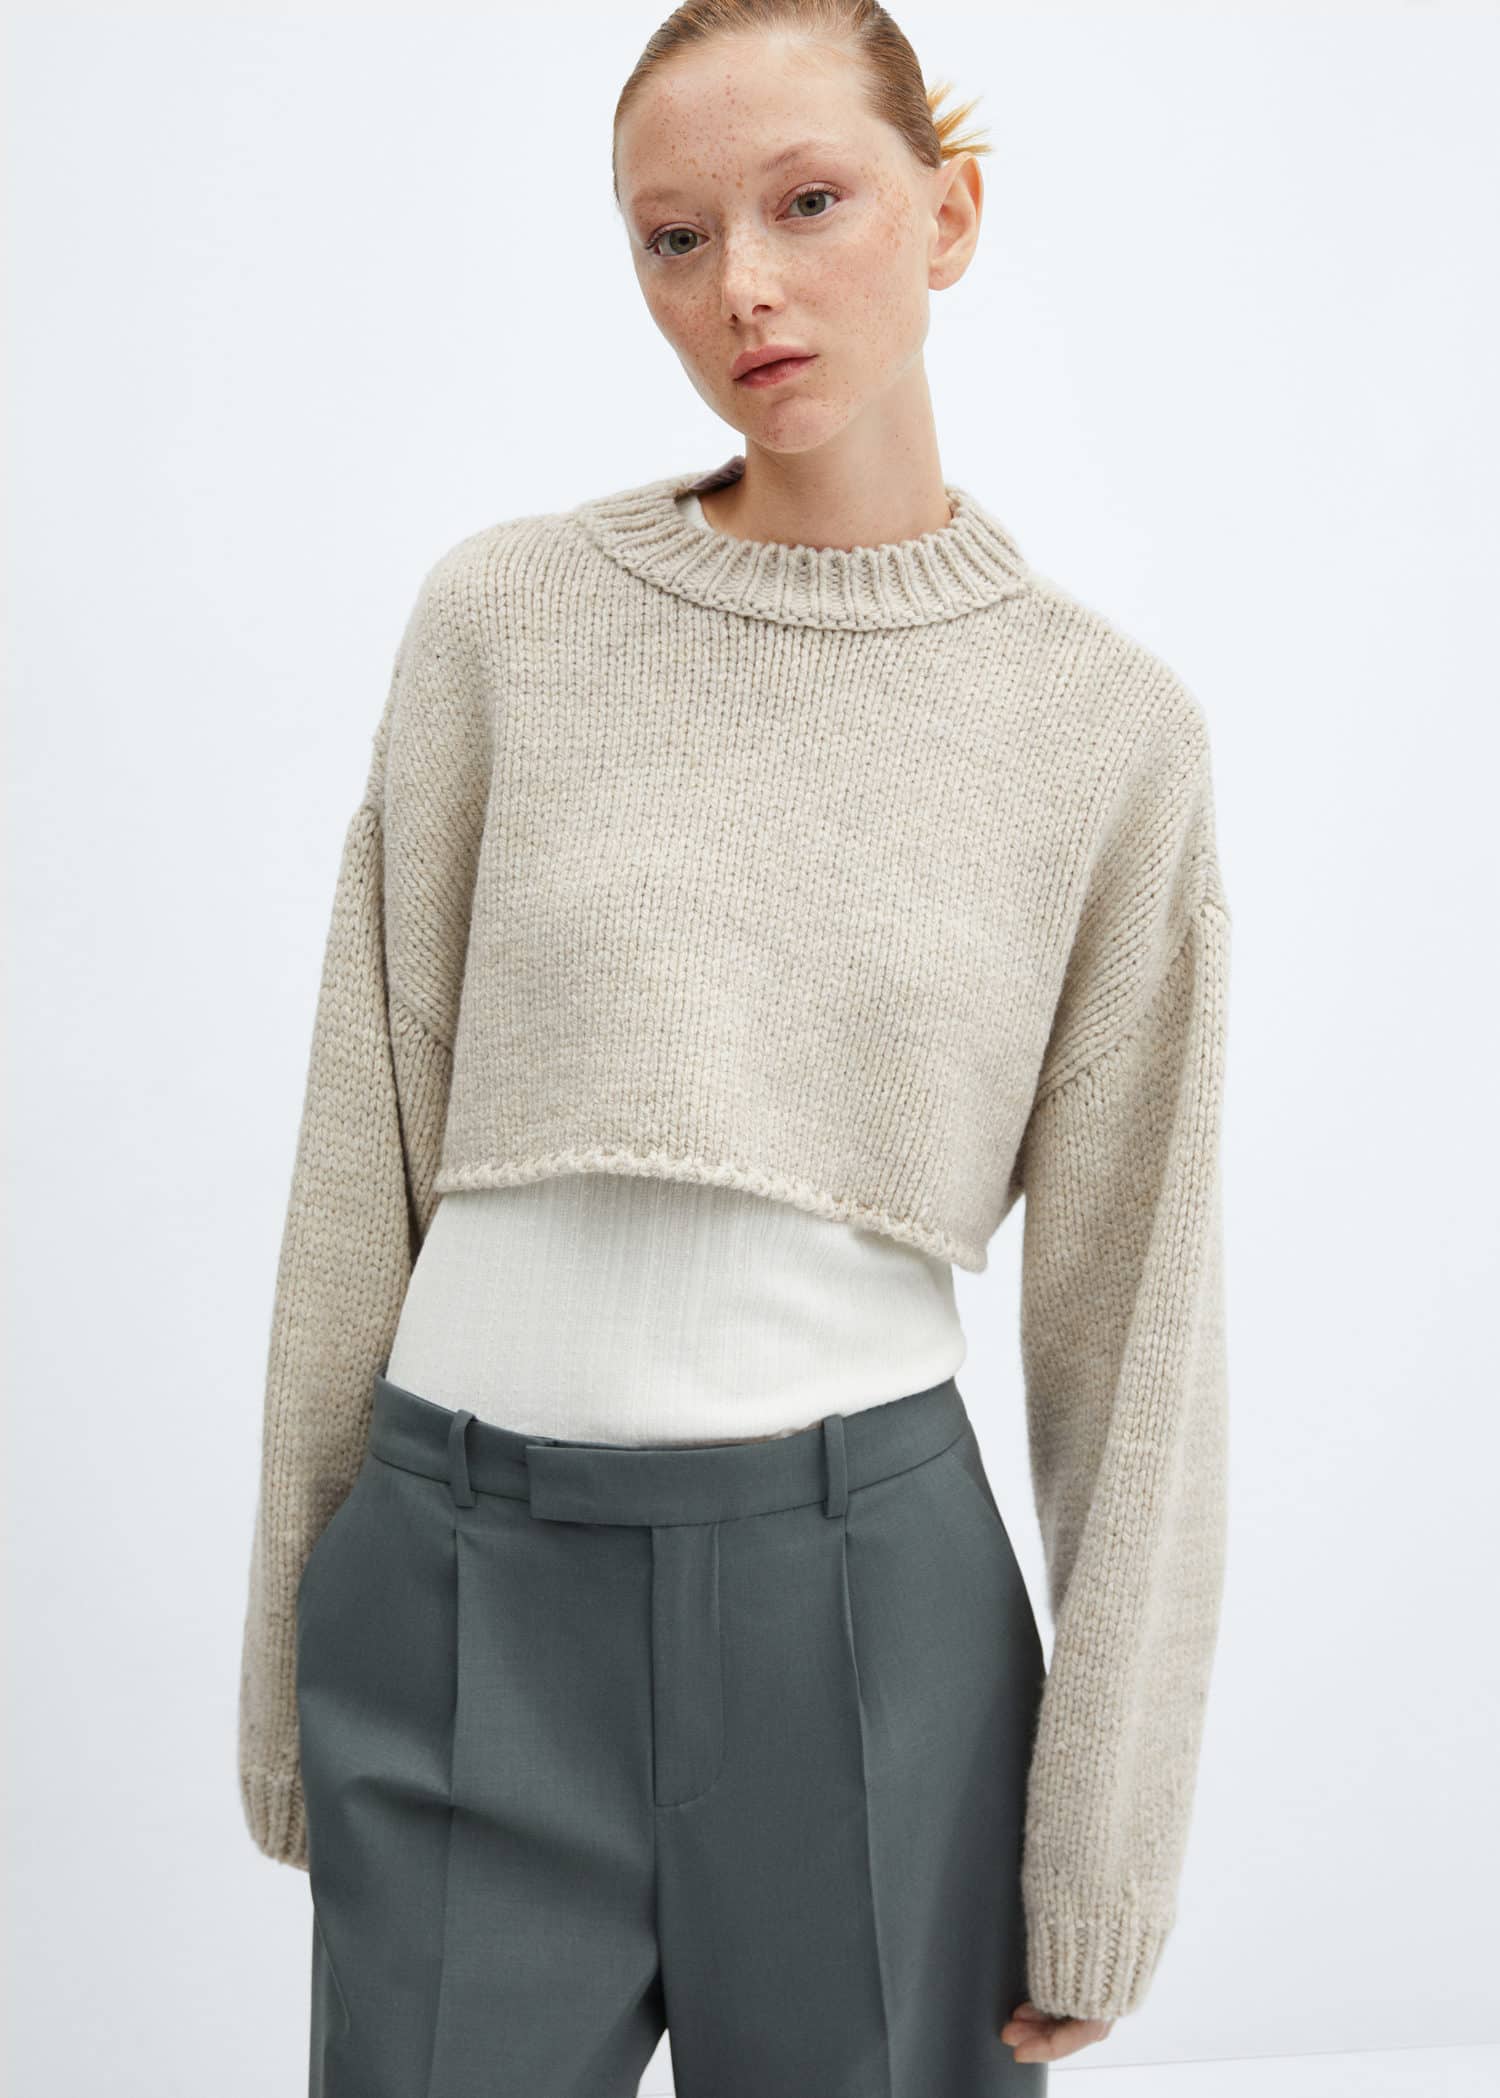 Cropped Knitted Jumper pattern by Emily Milbourne